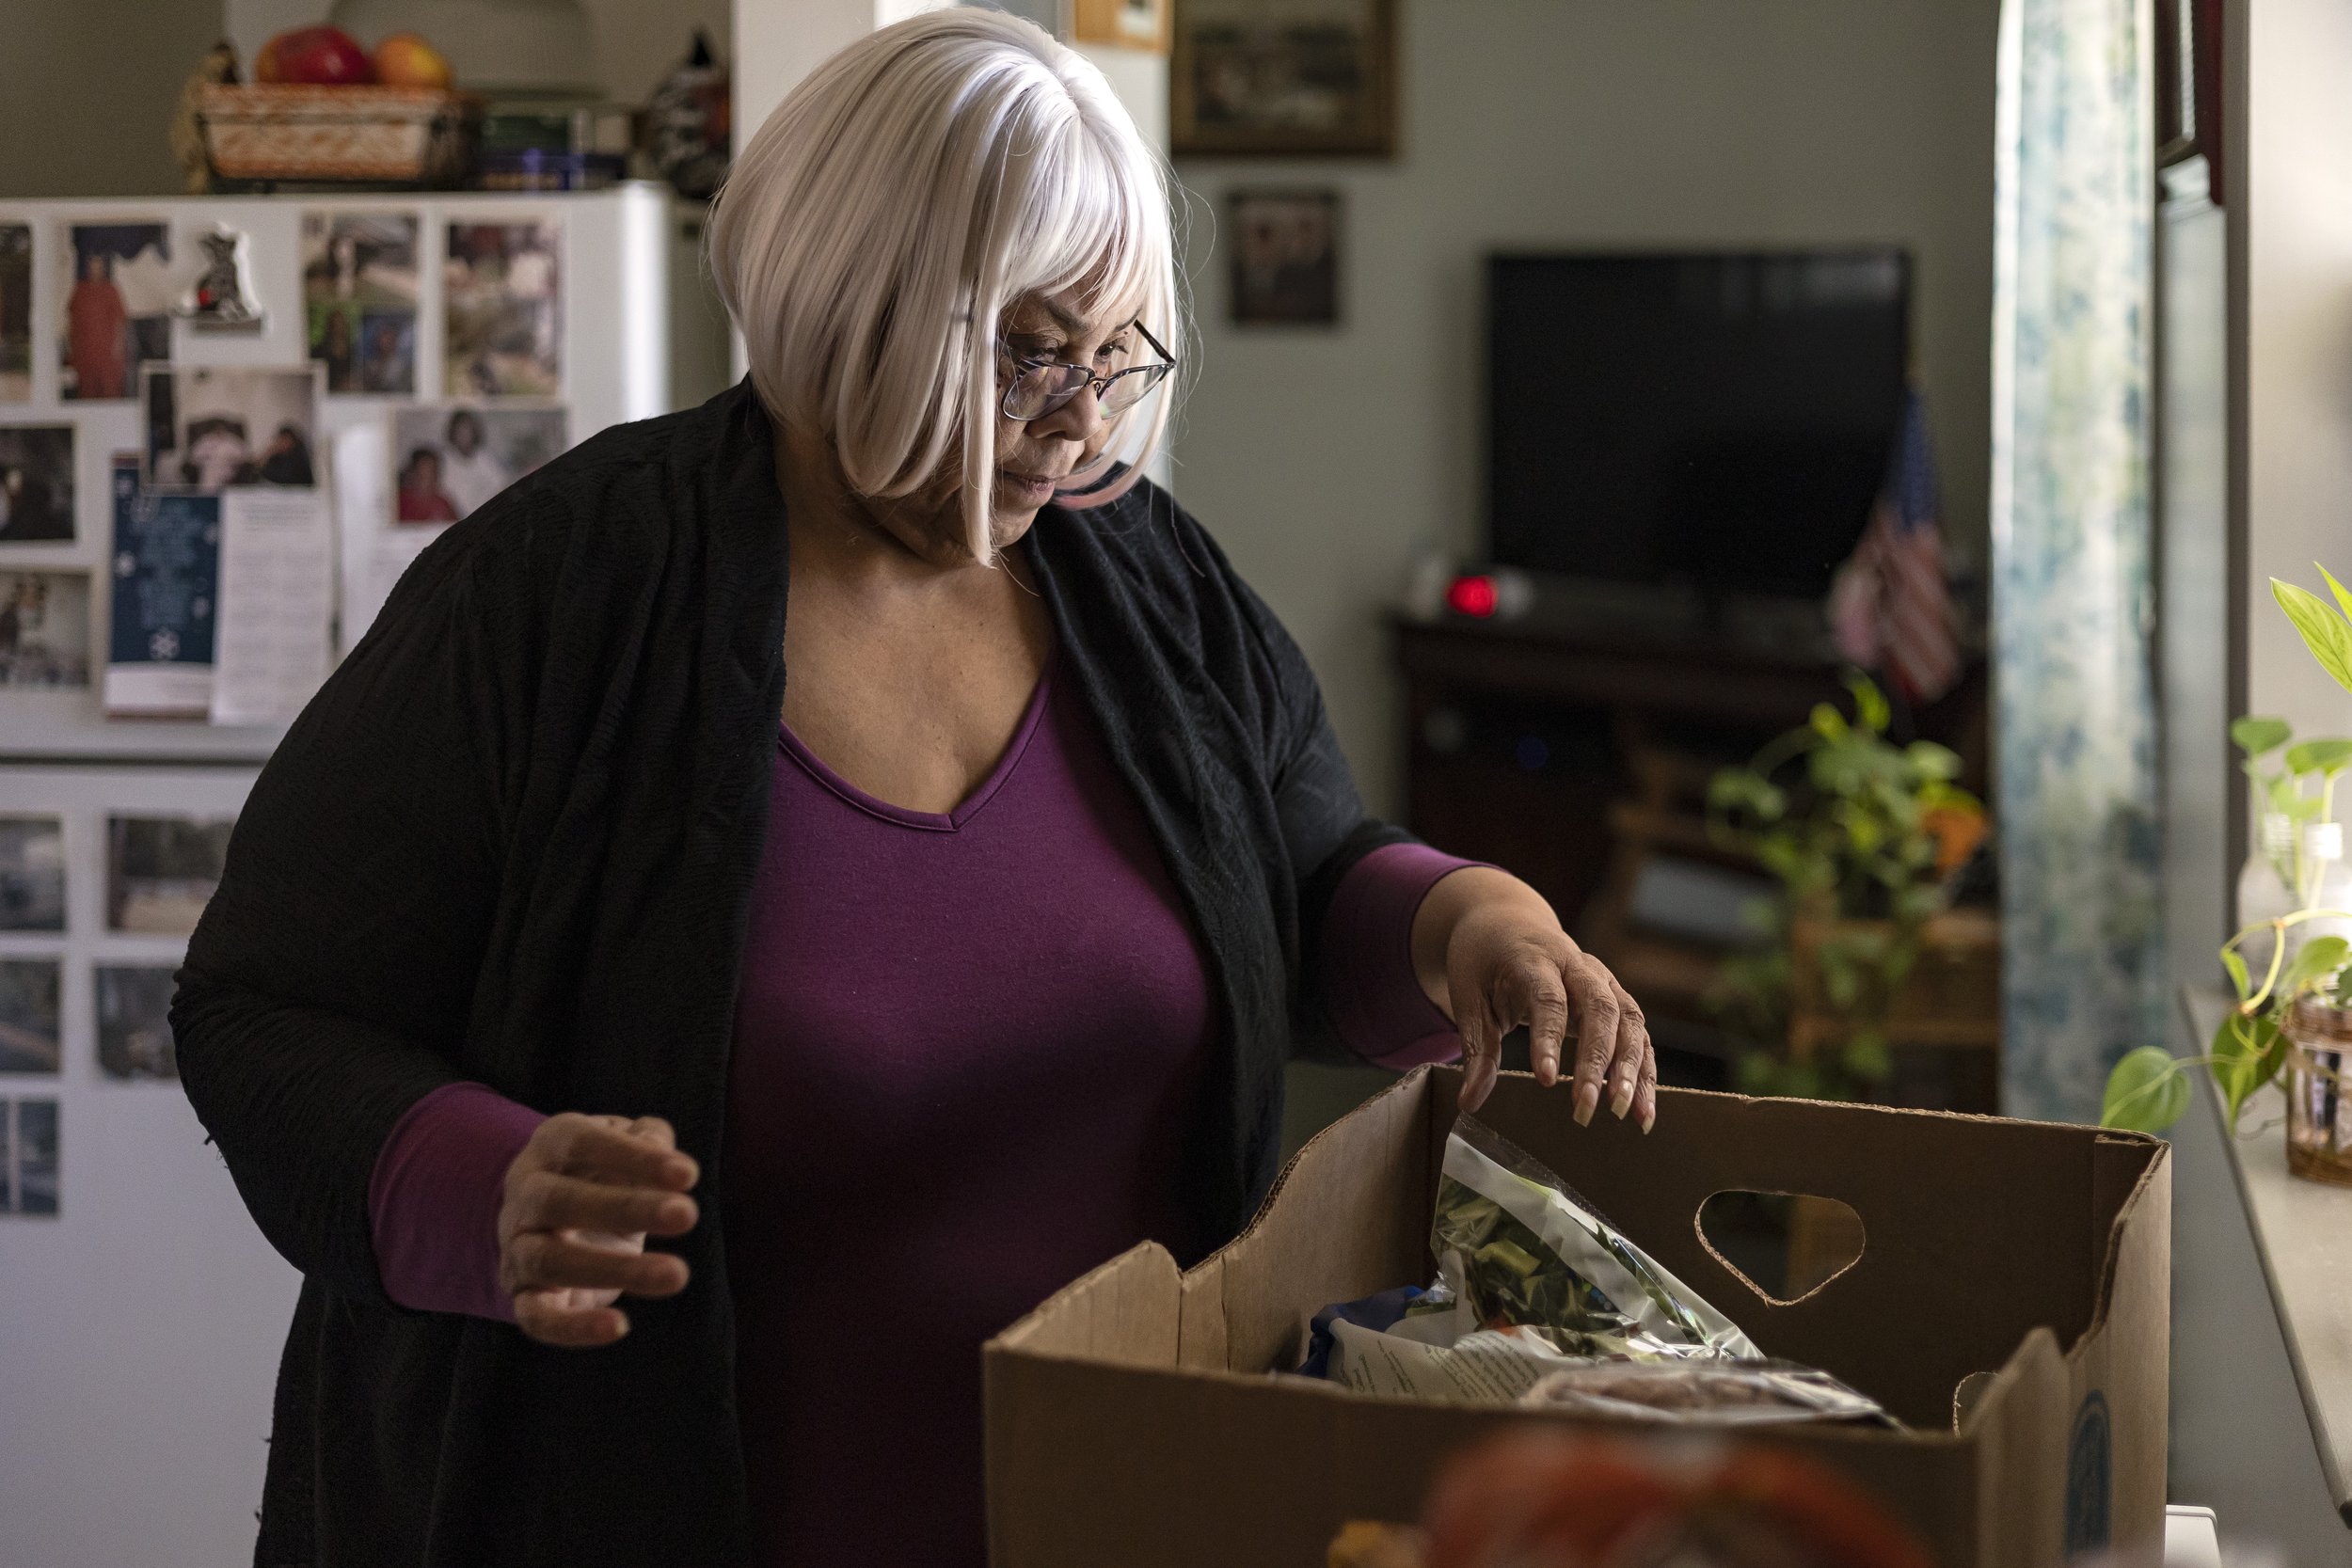  Carol Oliver, an Athens resident of almost 40 years, reviews her weekly box of food donations delivered by volunteers from Mt. Olive Seventh-day Adventist Church at Parkview Homes on Tuesday, March 1, 2022 in Athens. Oliver, who has been receiving f